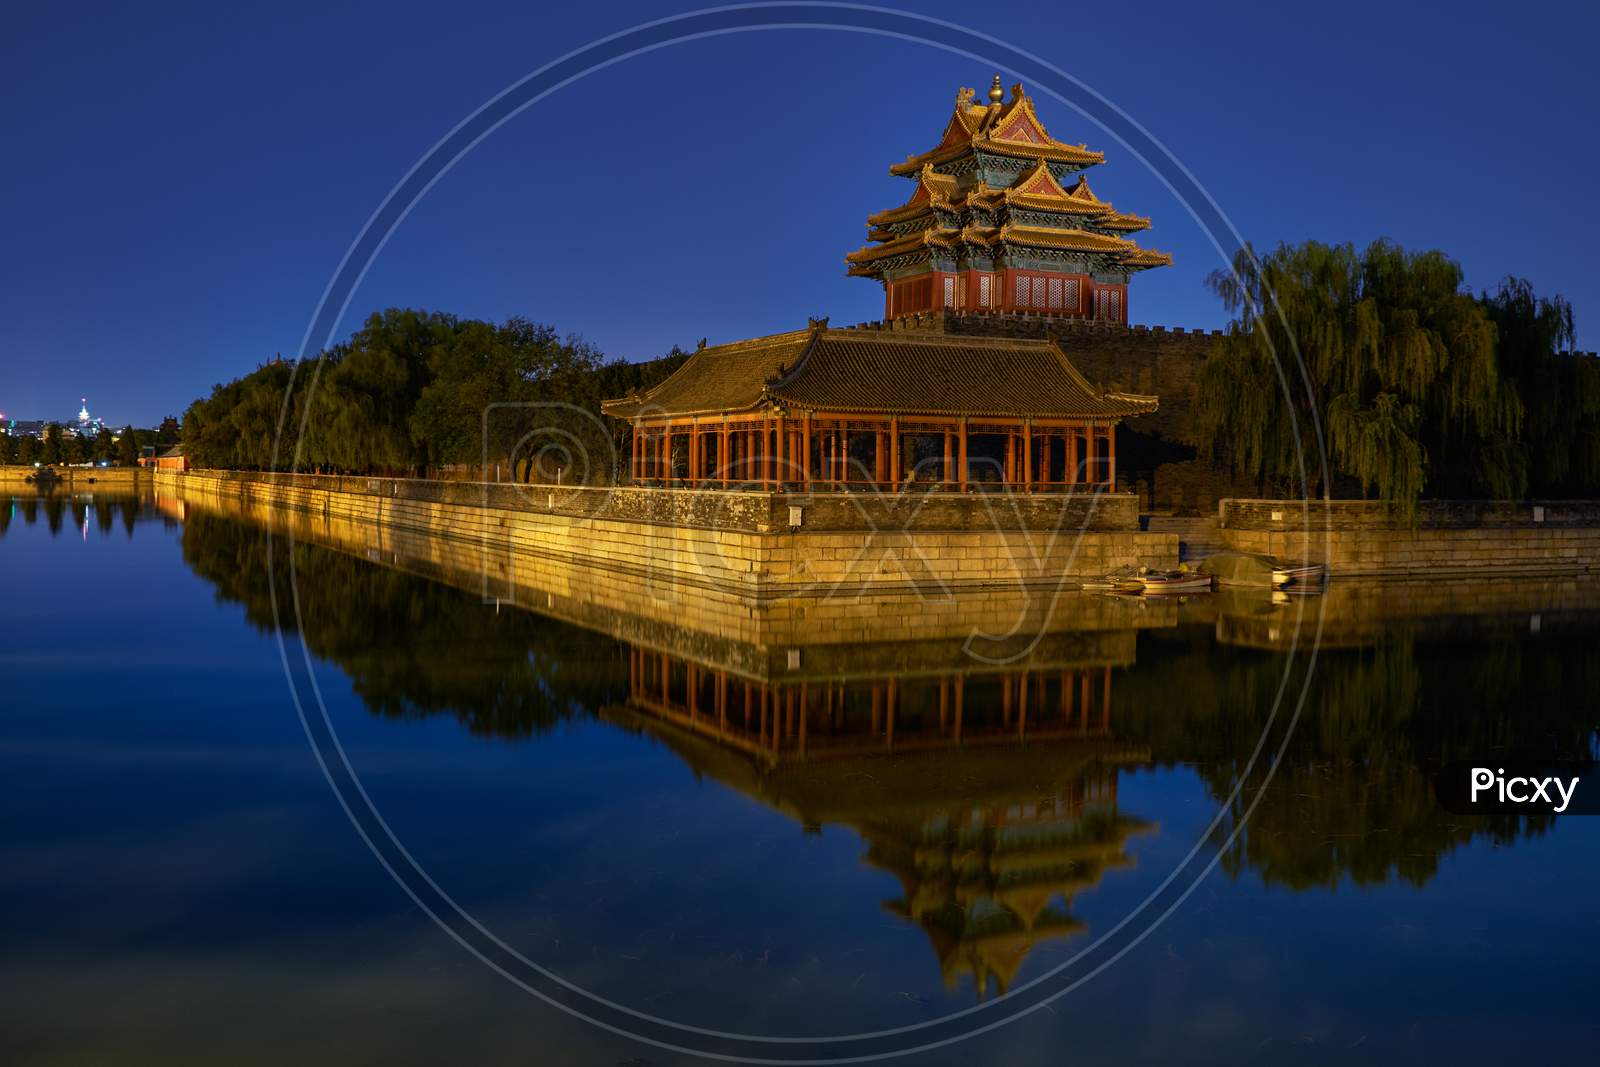 Northwestern Tower Of The Forbidden City Palace Museum In Beijing, China, Reflecting In The Water Moat At Night